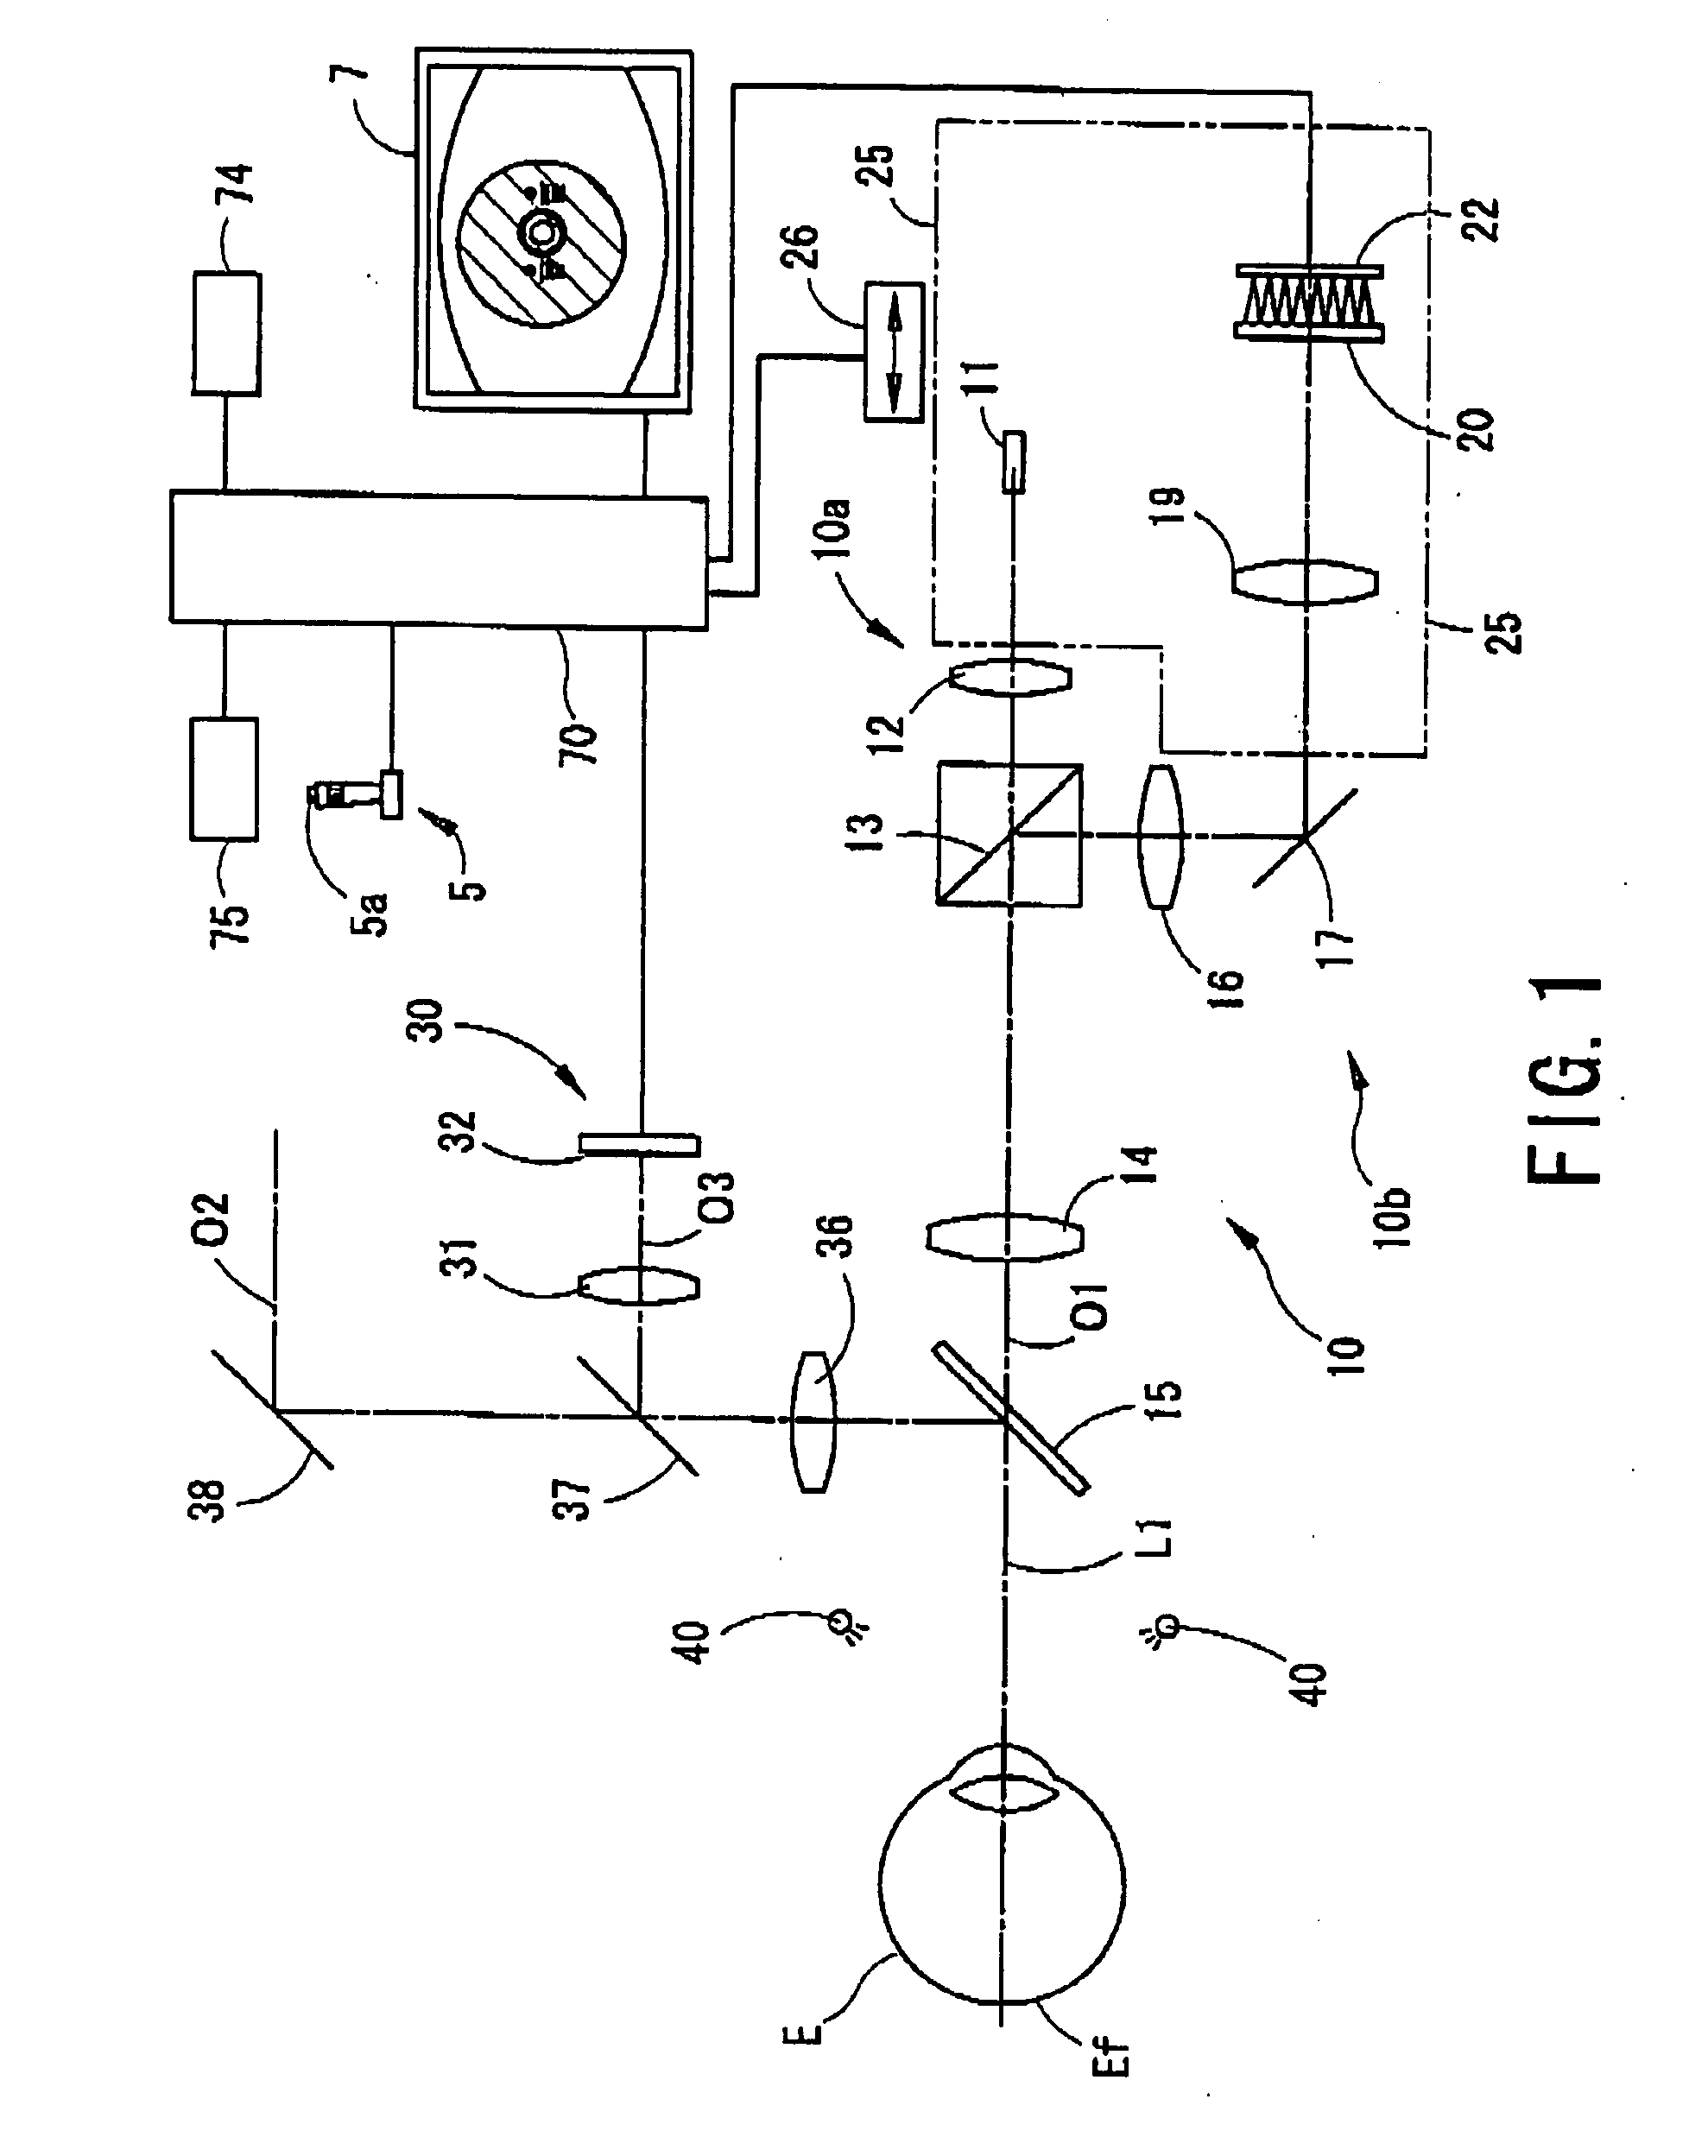 Ophthalmic measurement apparatus